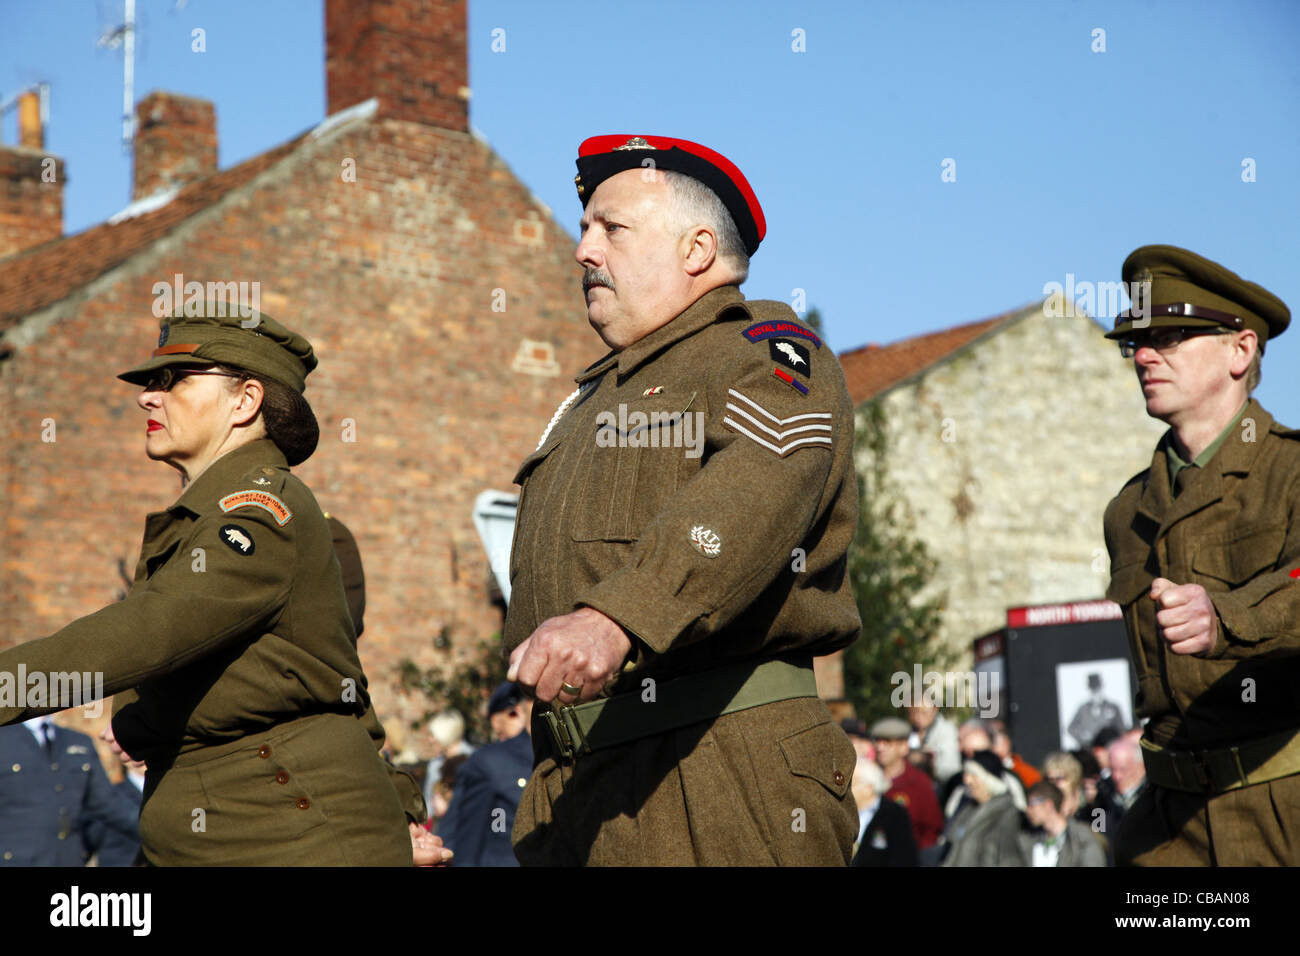 1940S MARCHING SOLDIERS PICKERING NORTH YORKSHIRE 15 October 2011 Stock Photo